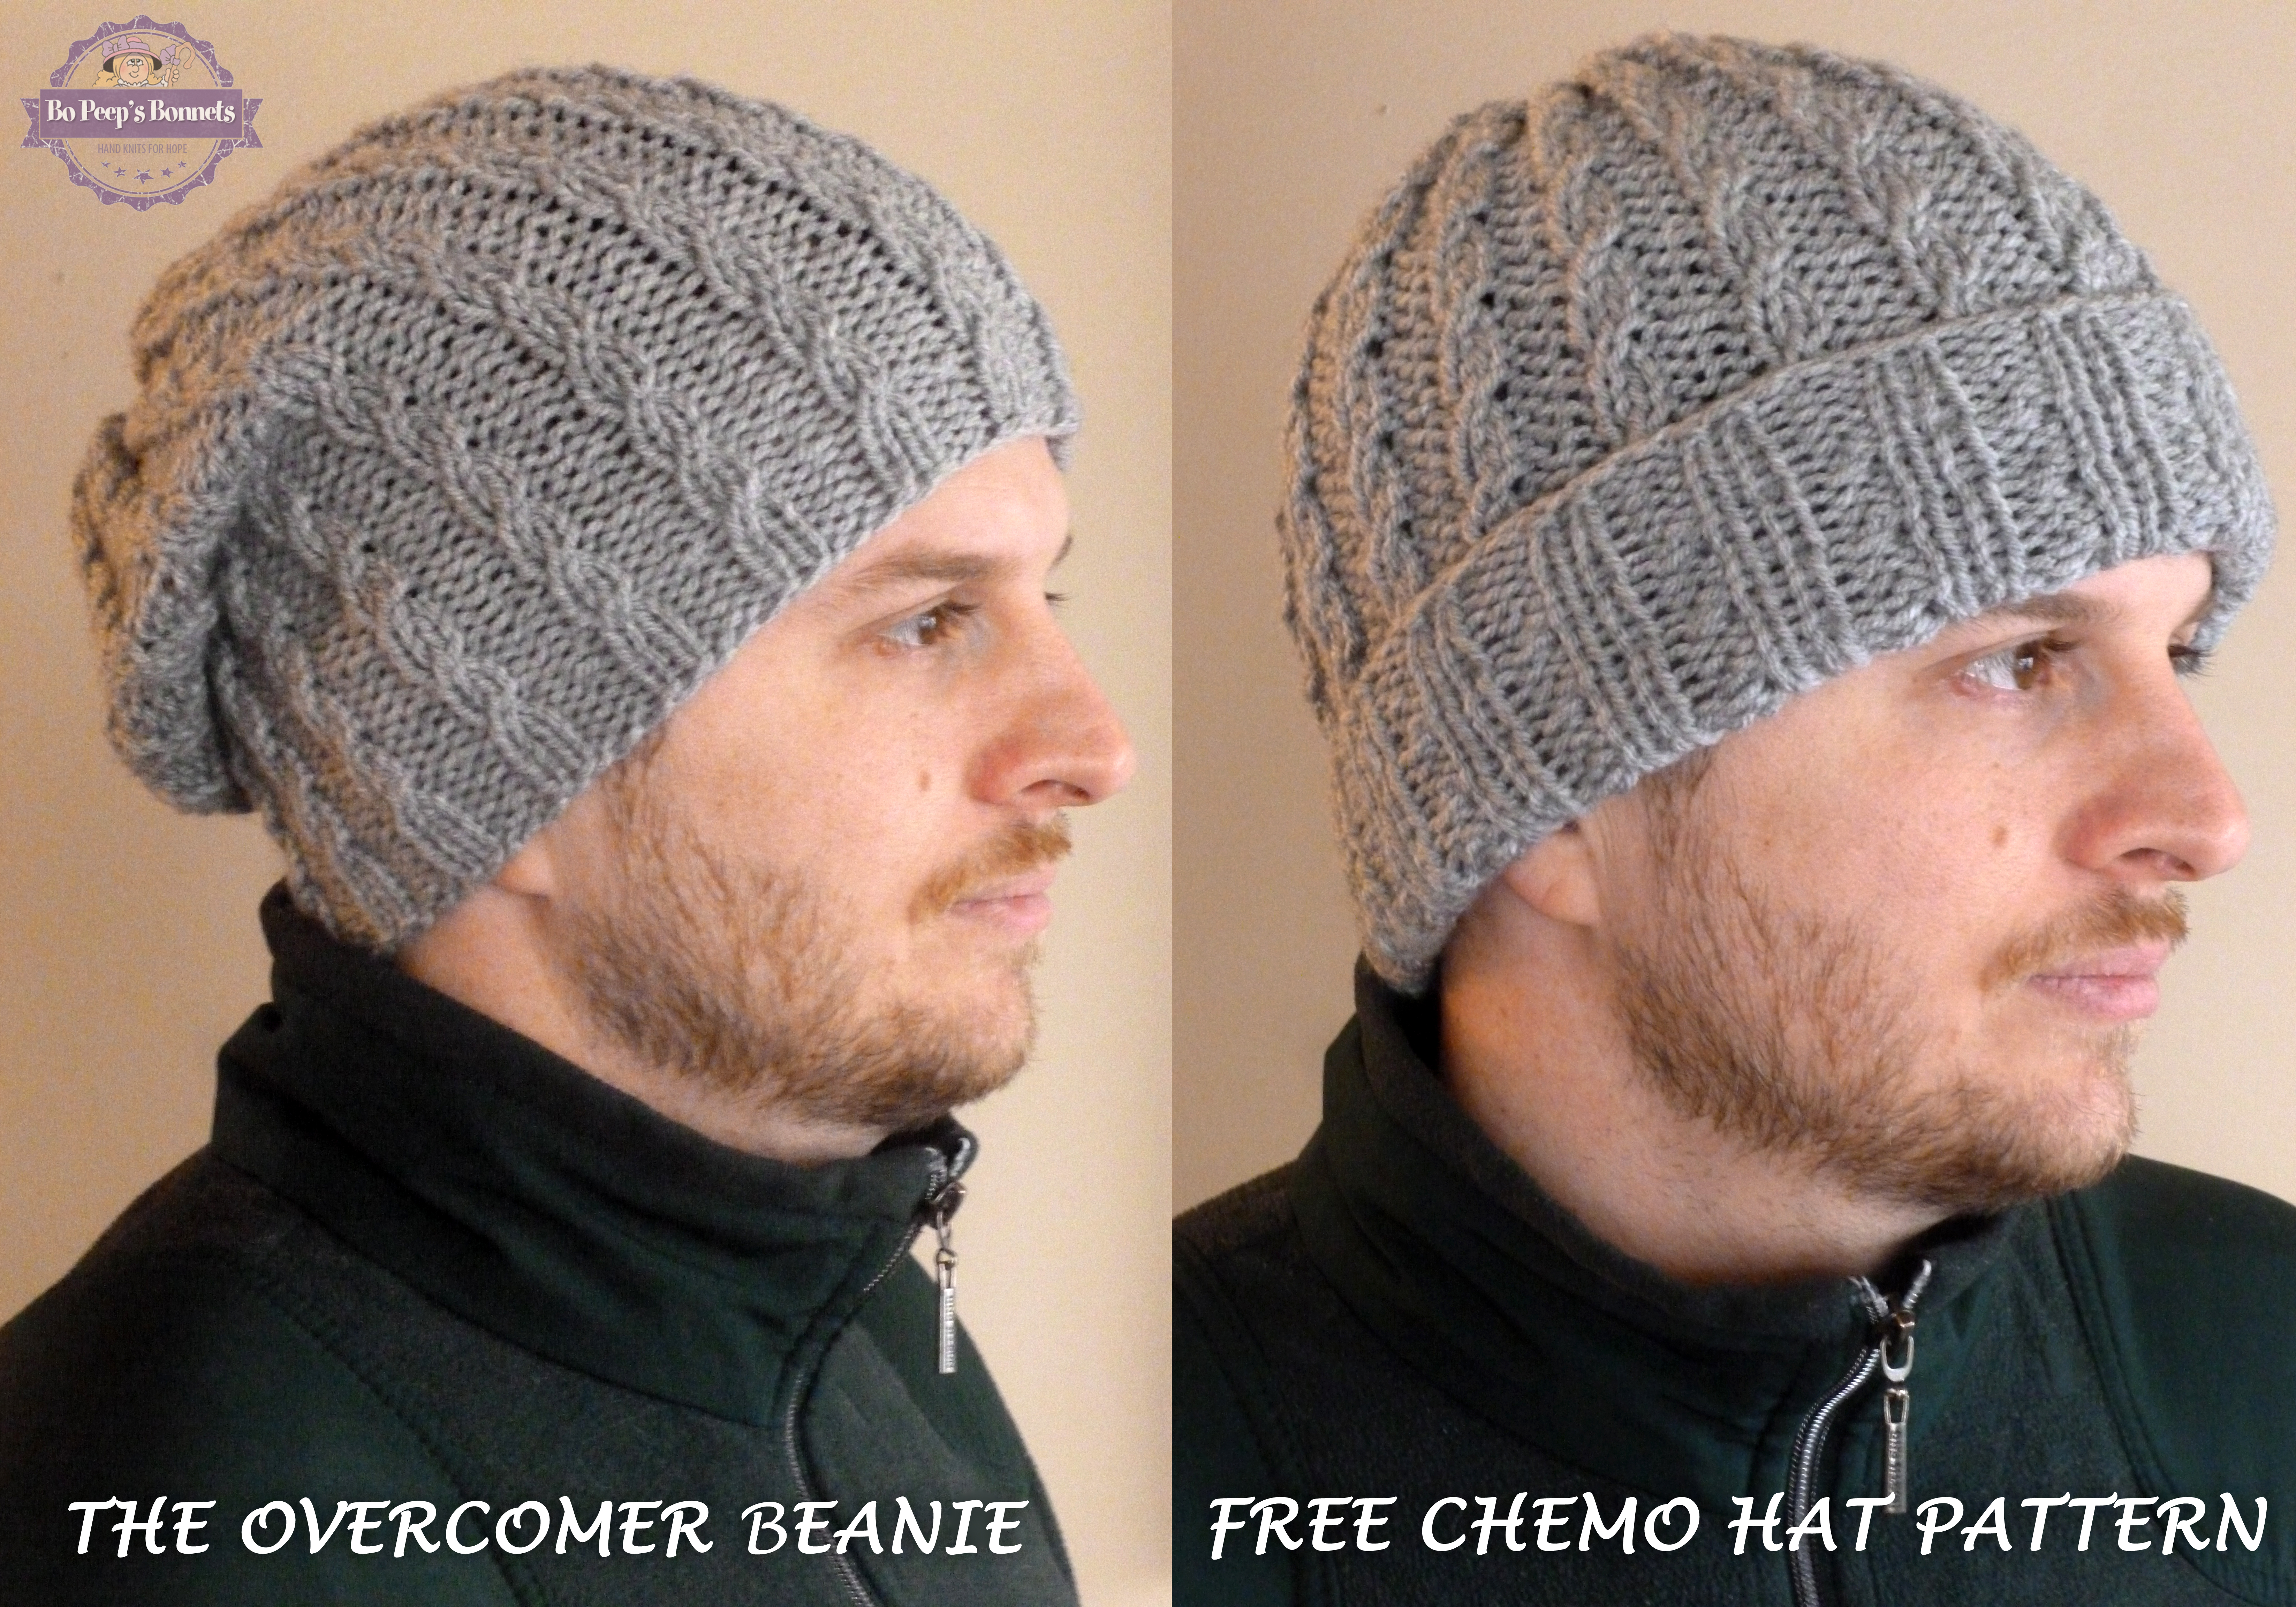 Knitted Hats Patterns Free Chemo Hat Patterns